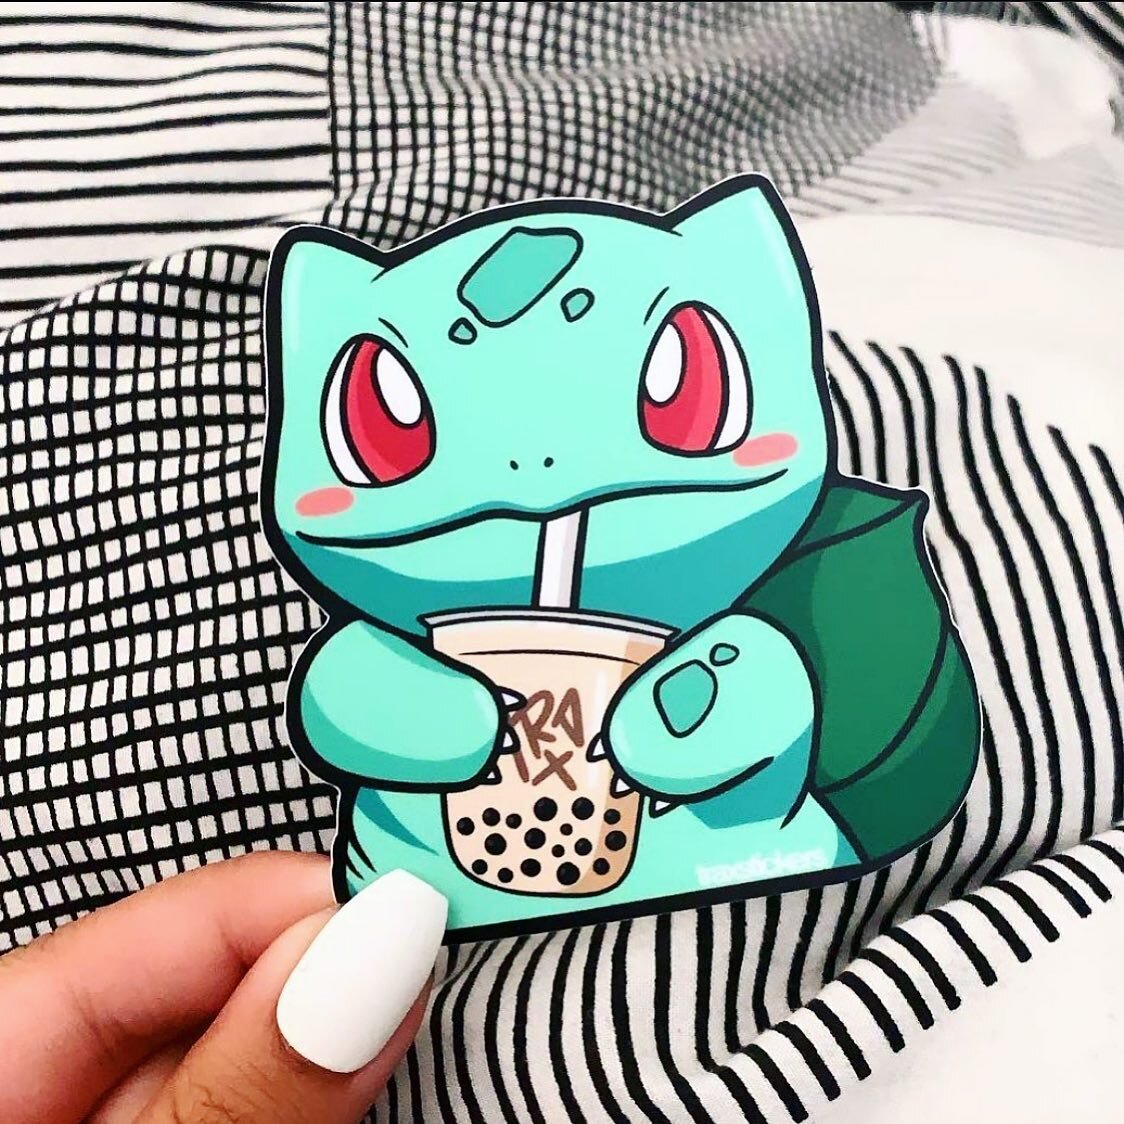 Some Bulbasaur stickers that we made for @trax.stickers 👌